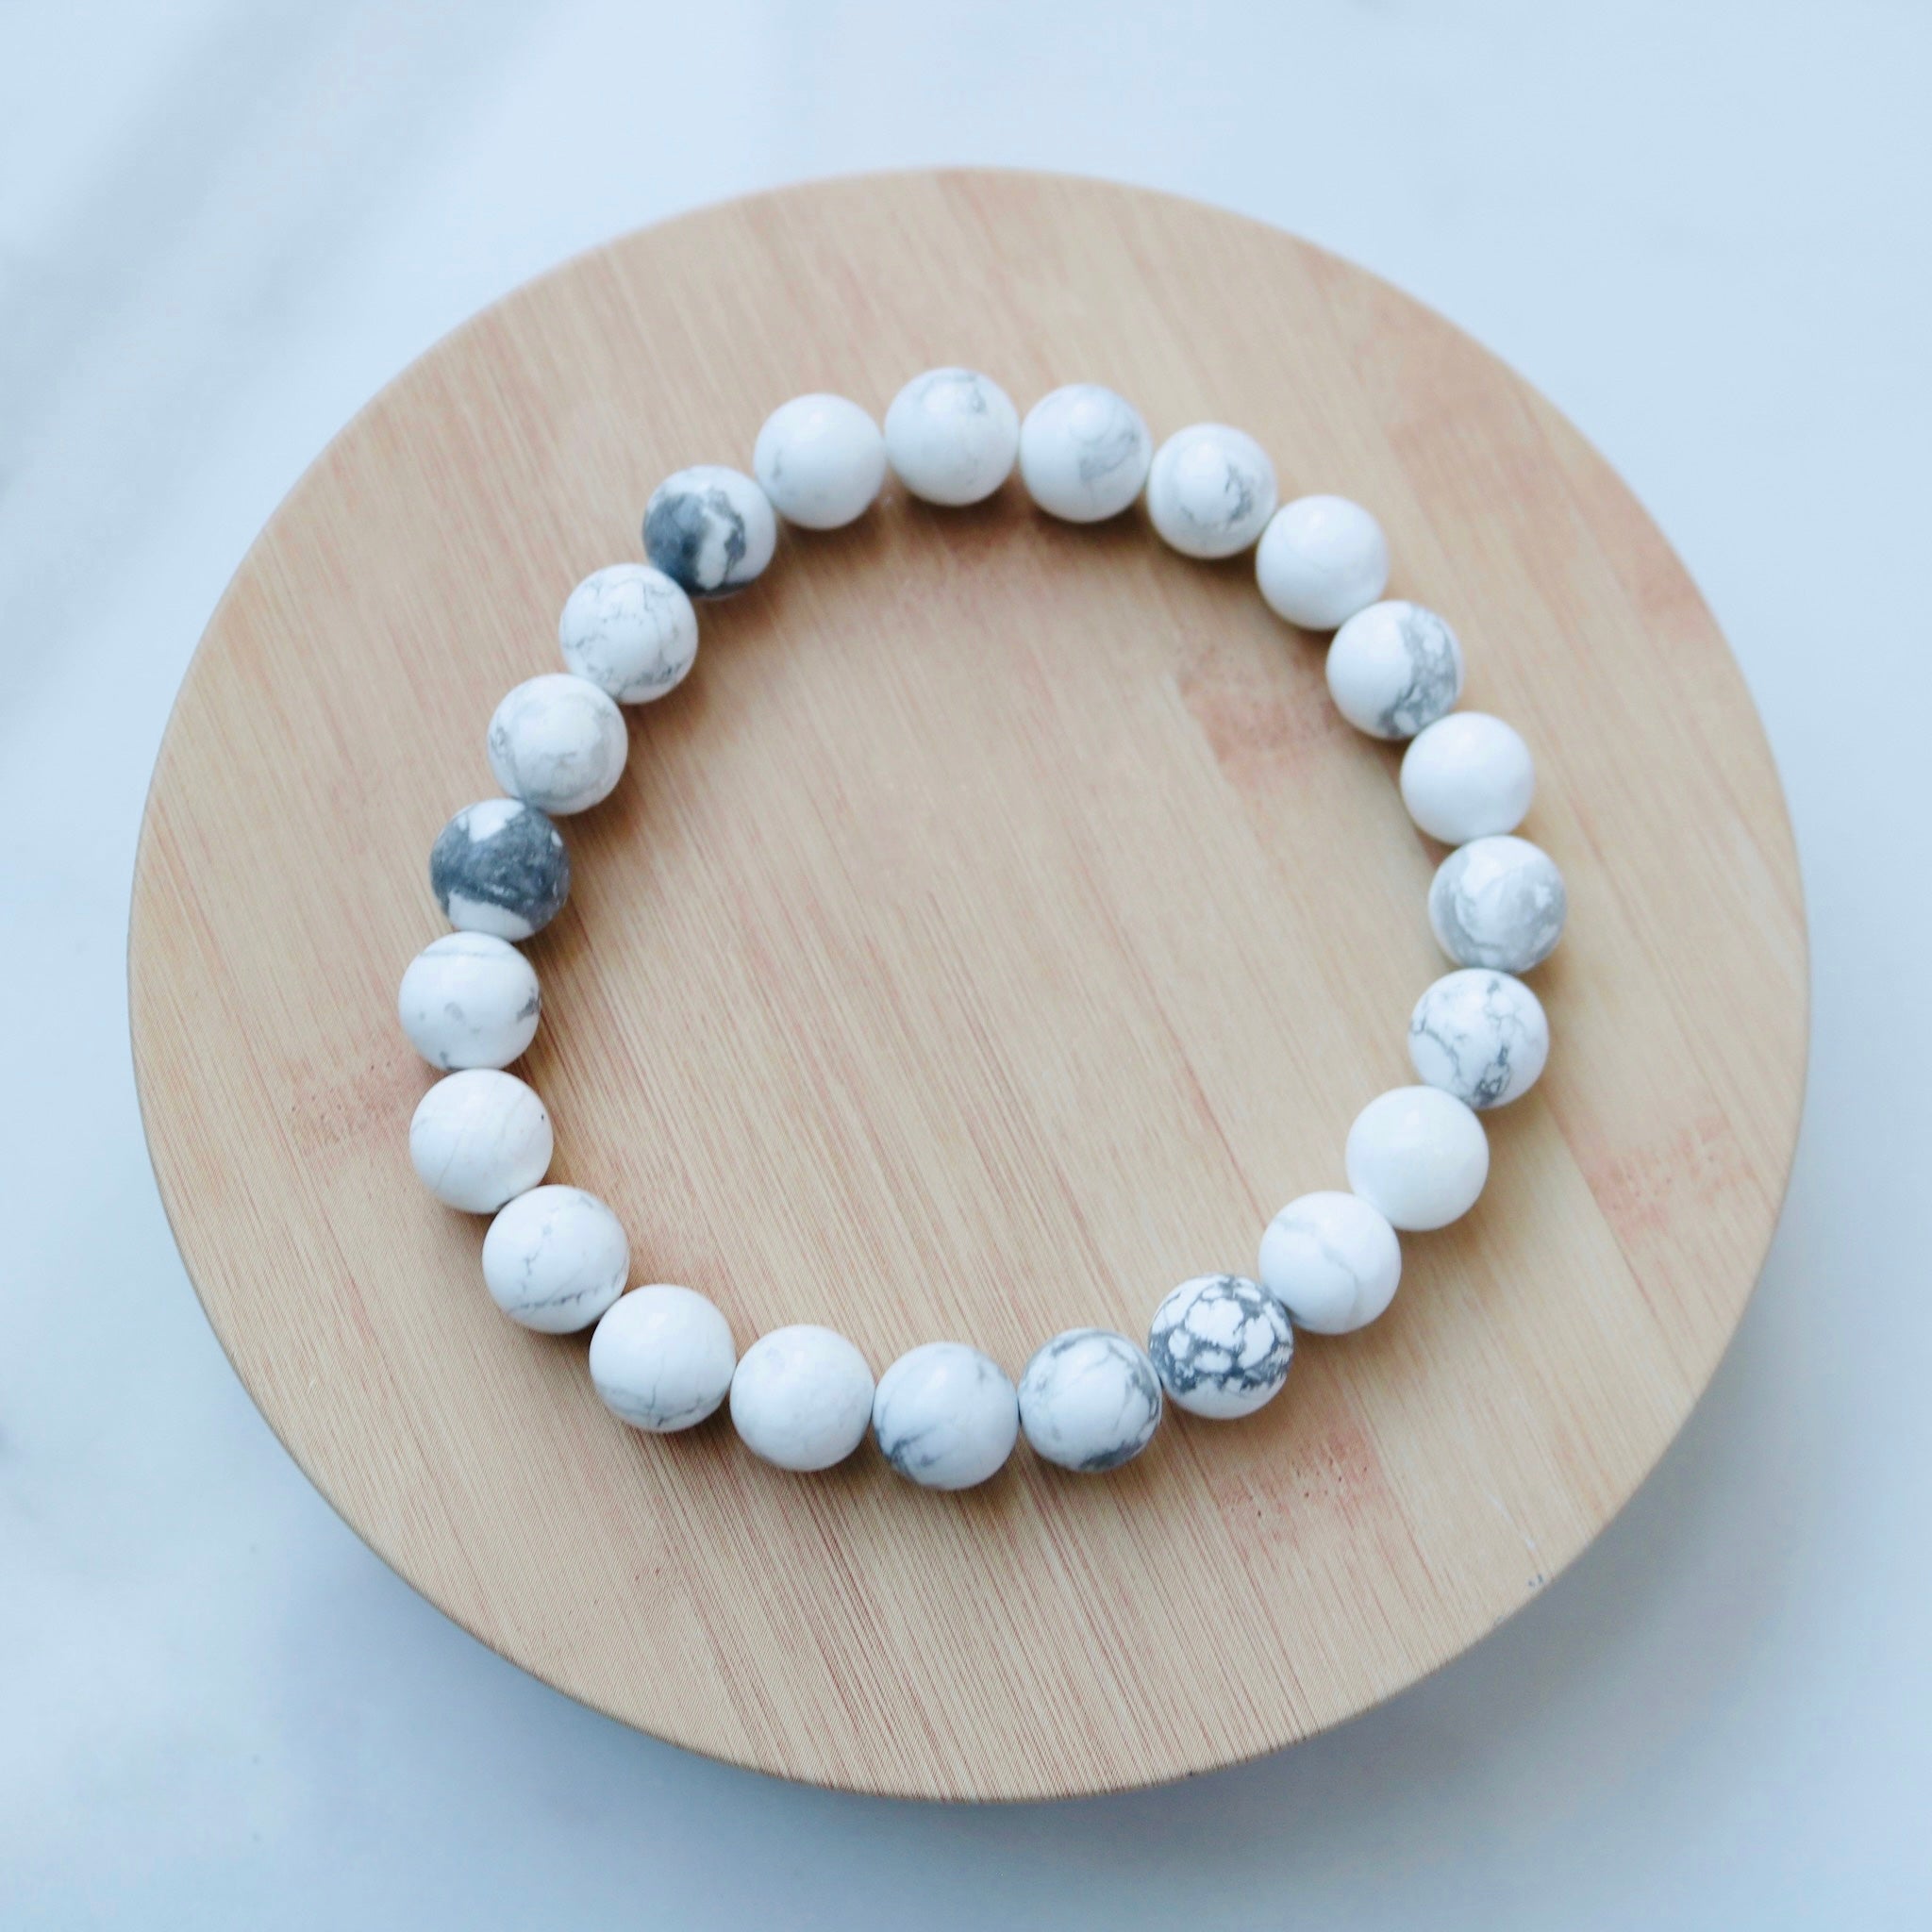 Authentic crystal bracelet made of real howlite beads